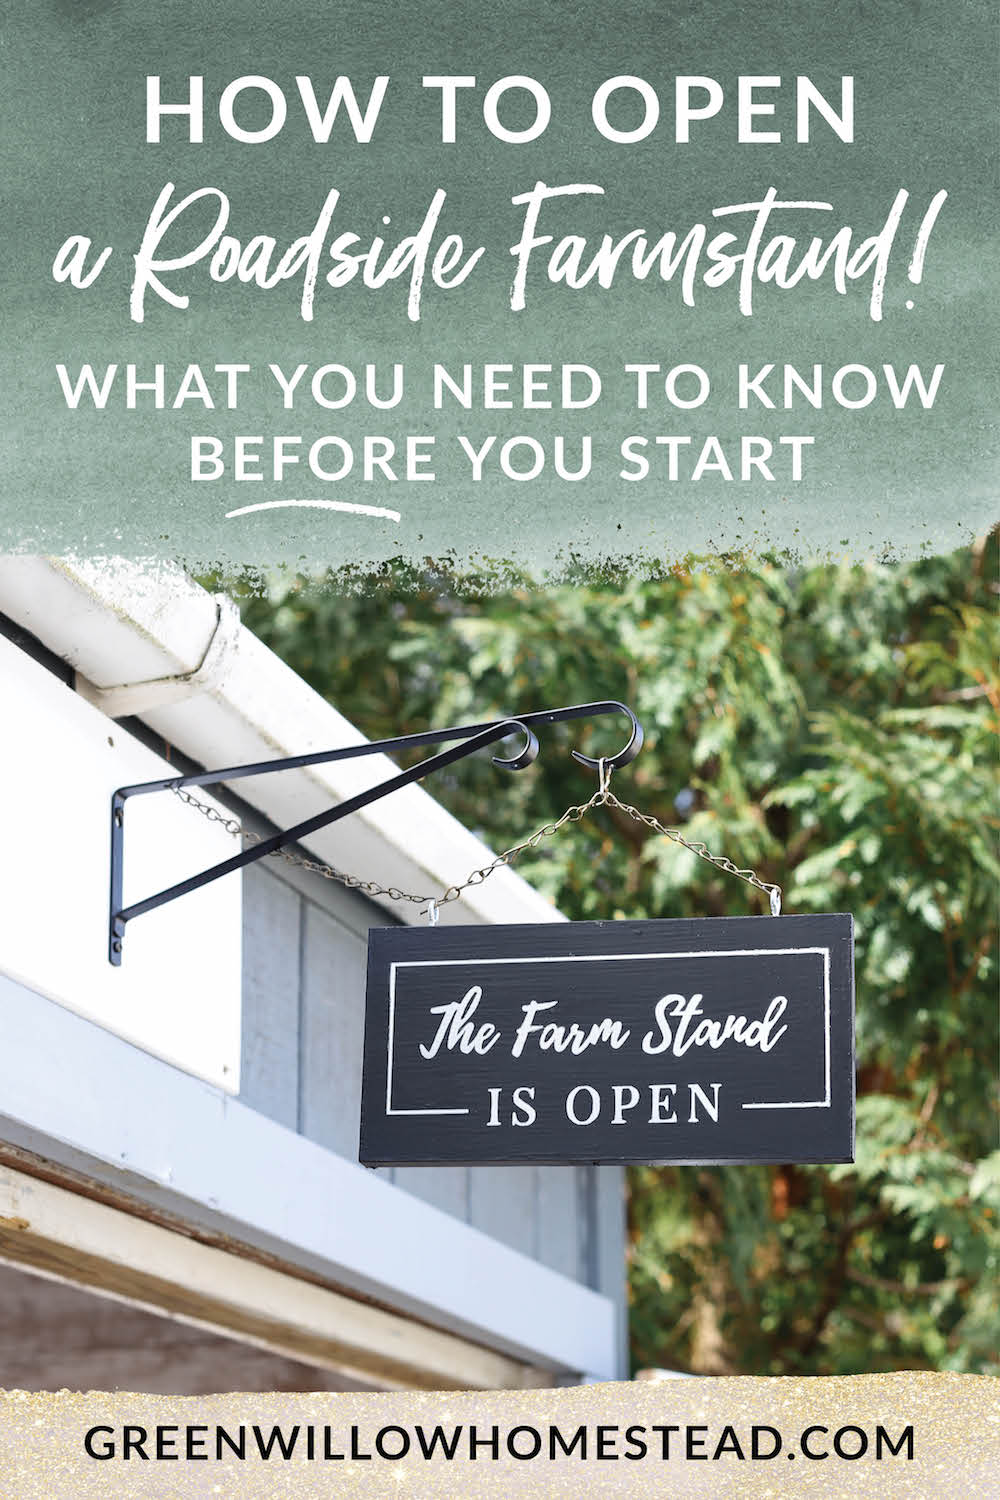 How to open a roadside farmstand and what to know before you start